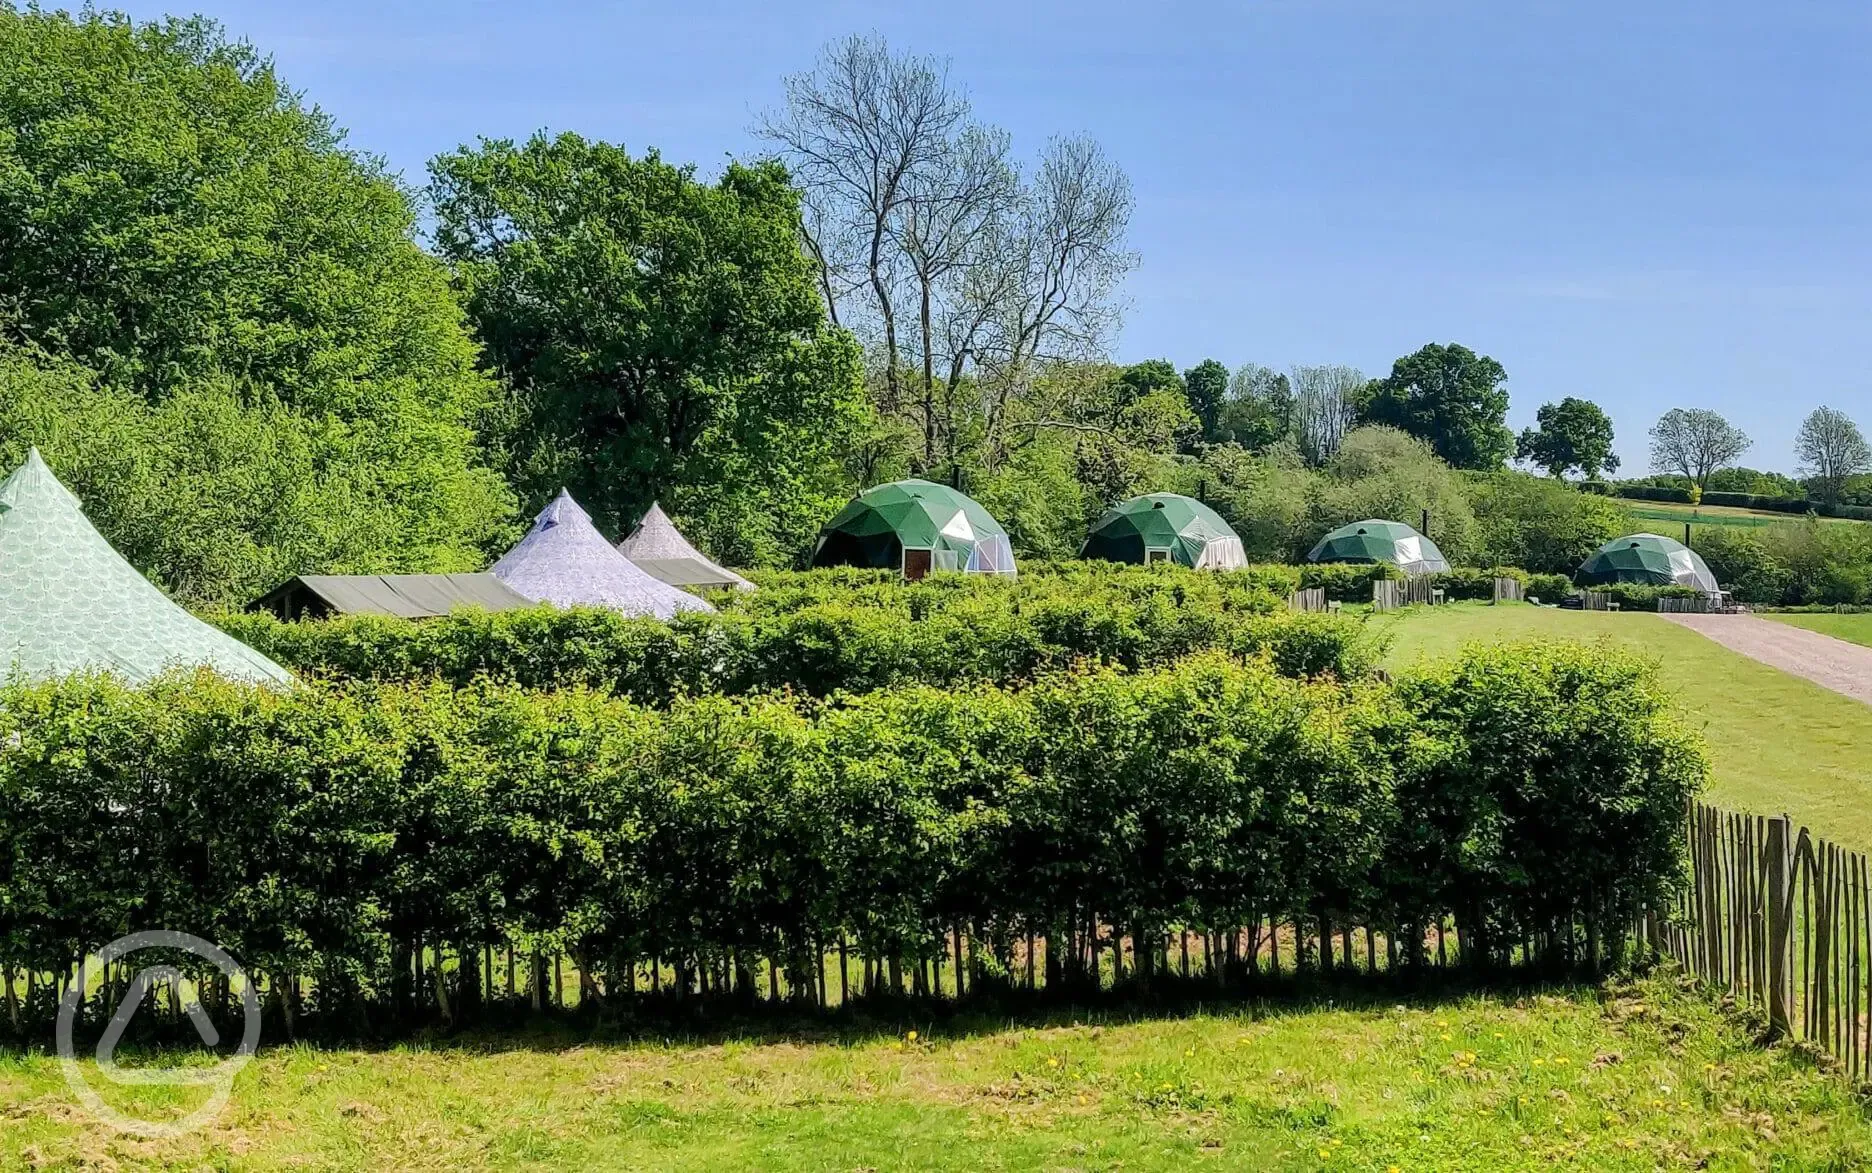 Grassy Field bell tents and geodomes